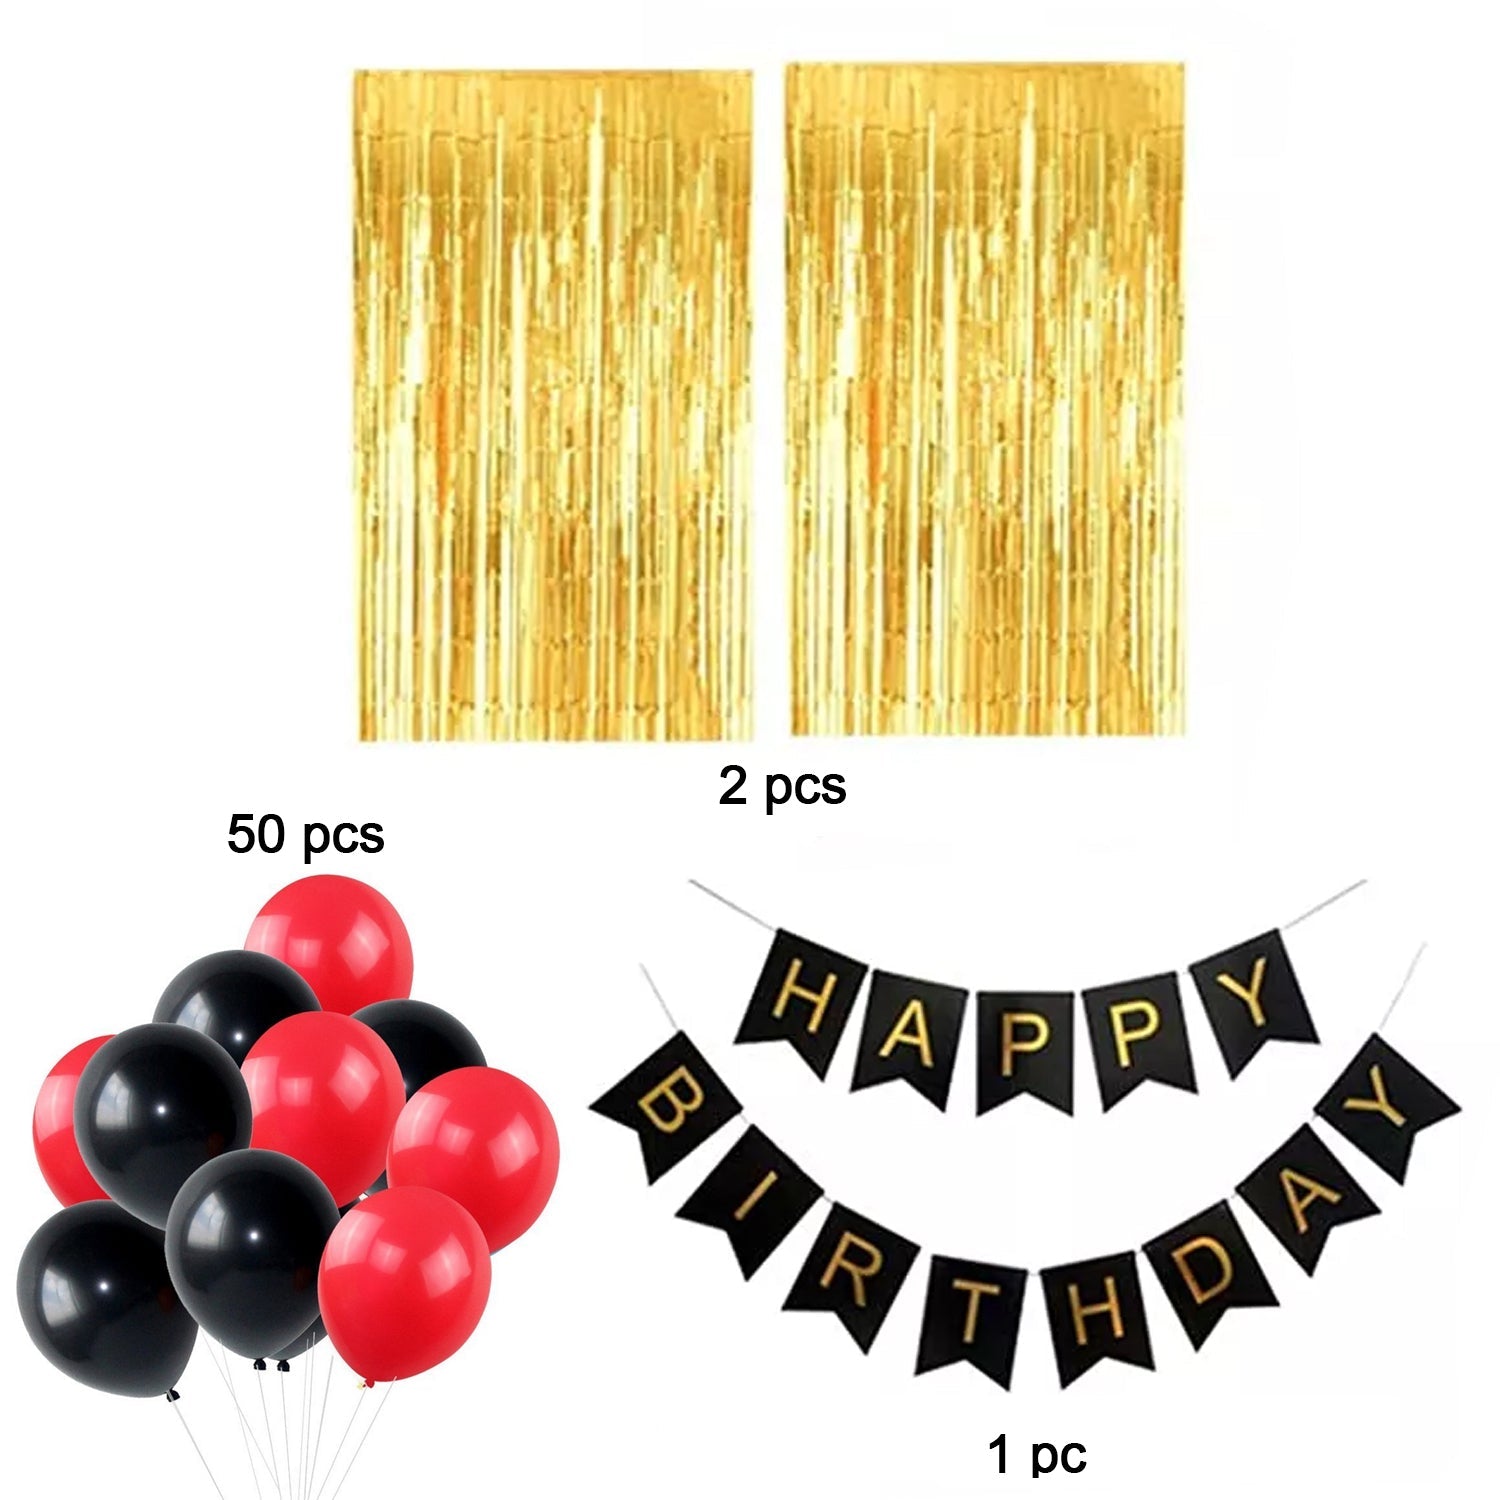 4828 Wall Decor HBD Kit widely used for decorating house walls for special purposed like birthday, get-togethers and all etc. freeshipping - DeoDap